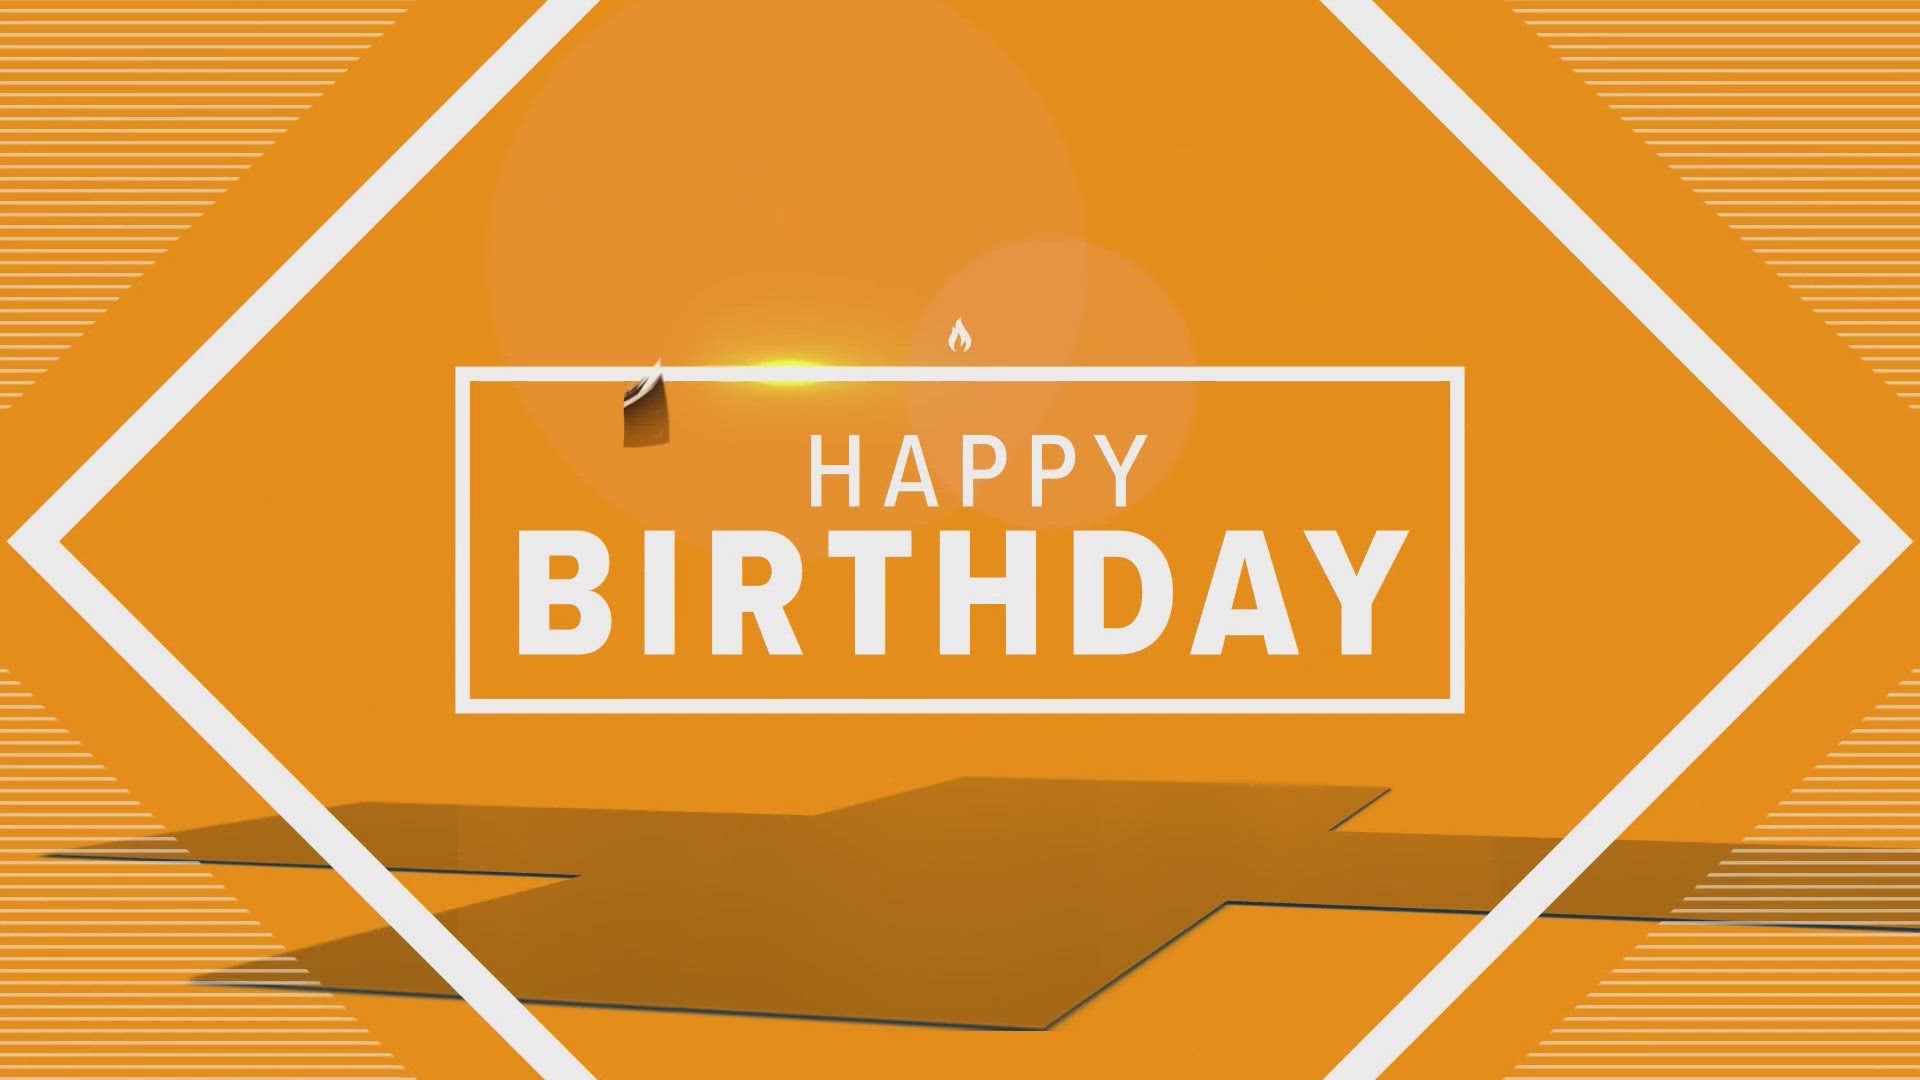 Texas Today wishes everyone born on September 14, a very happy birthday!